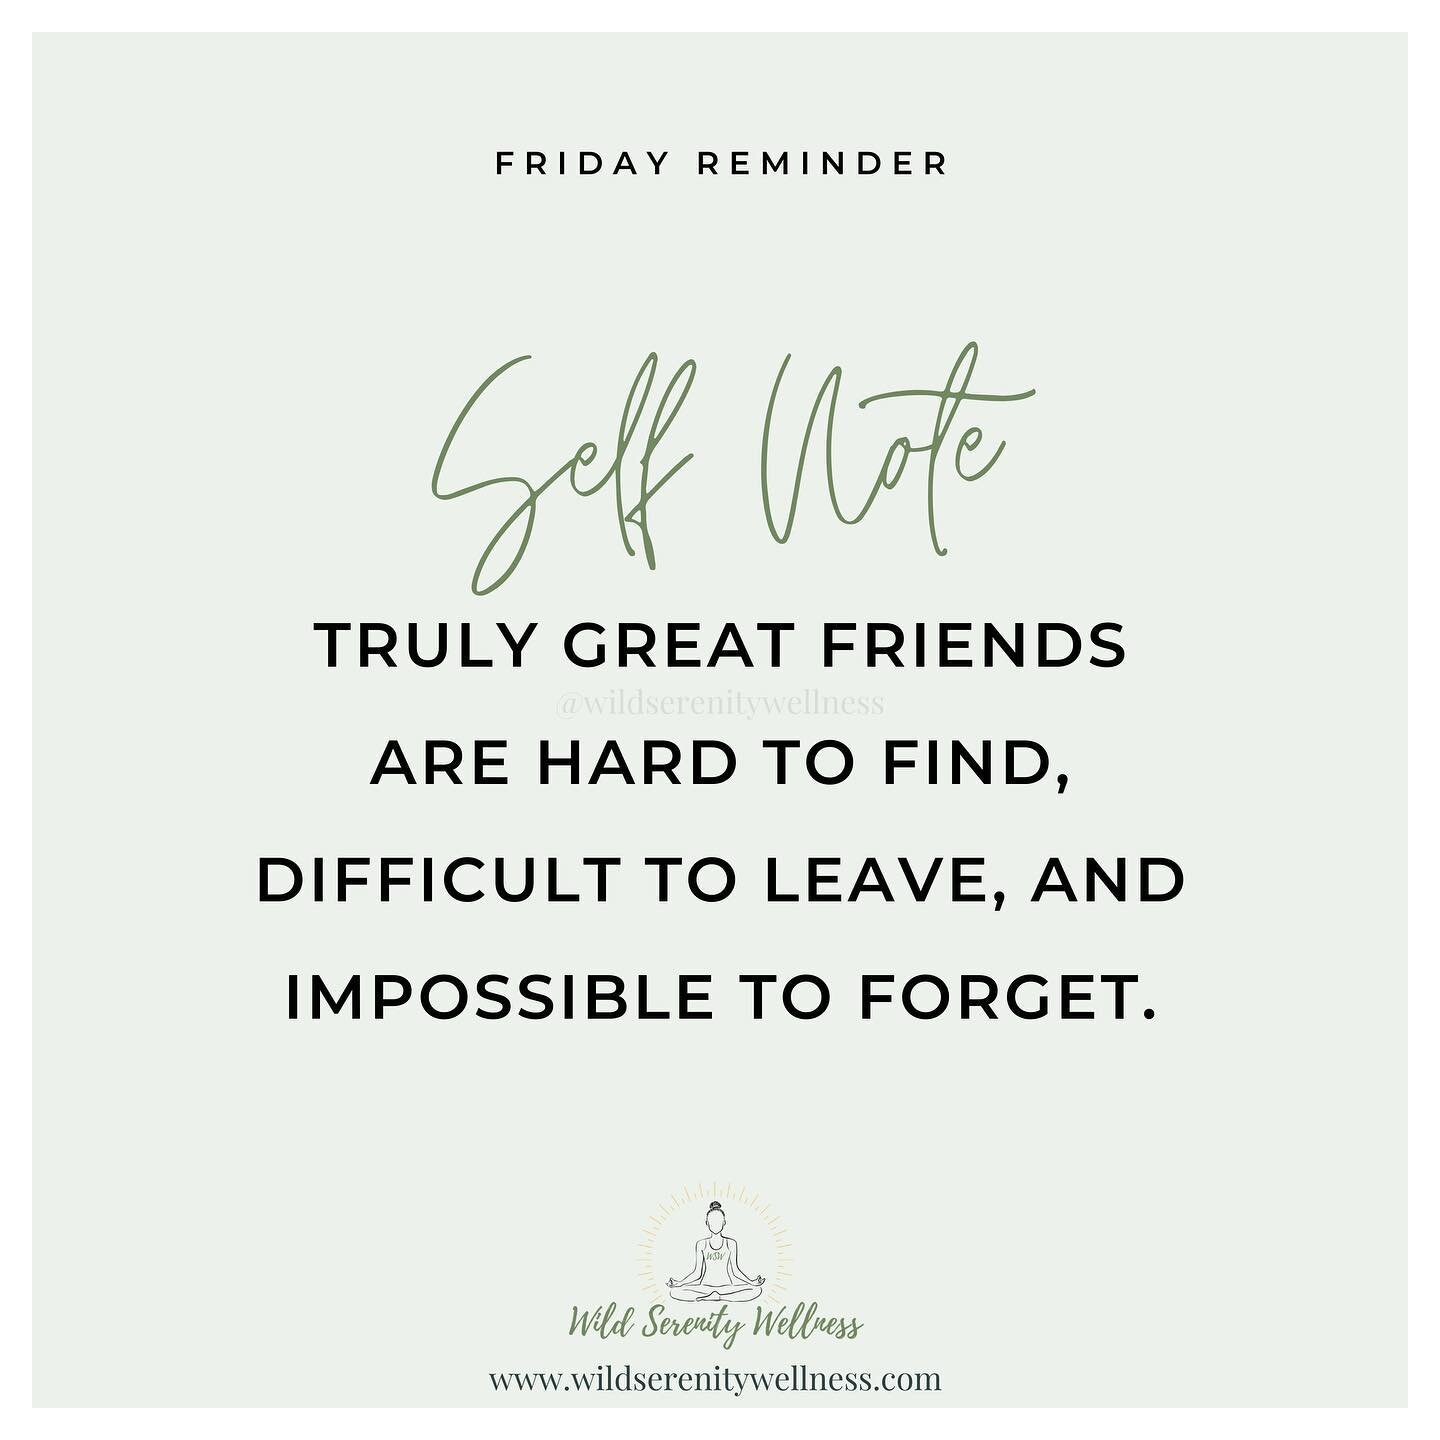 Happy Friday!!! ☺️☺️☺️

Real friends work on their wellness together... 
Be a True Friend and tell your friend about Mind your Wellness online Workshop. 
&gt;&gt;&gt; Link in bio &lt;&lt;&lt;
&bull;
&bull;
&bull;
#mindyourwellness #wellnessworkshop #